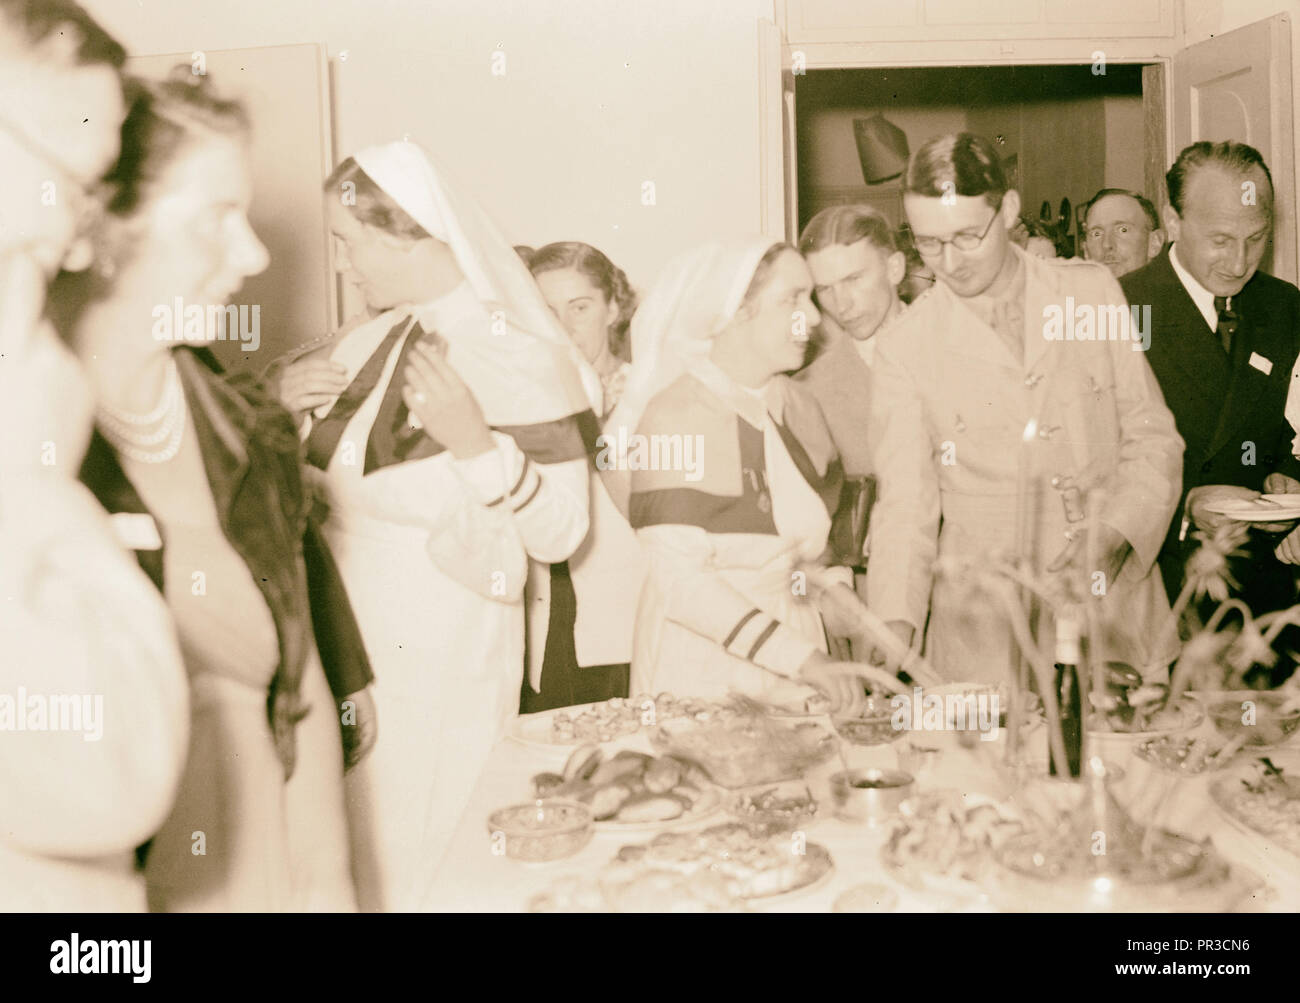 Dance in Dr. & Mrs. Wren's house Nurses & other guests around buffet table, Israel Stock Photo